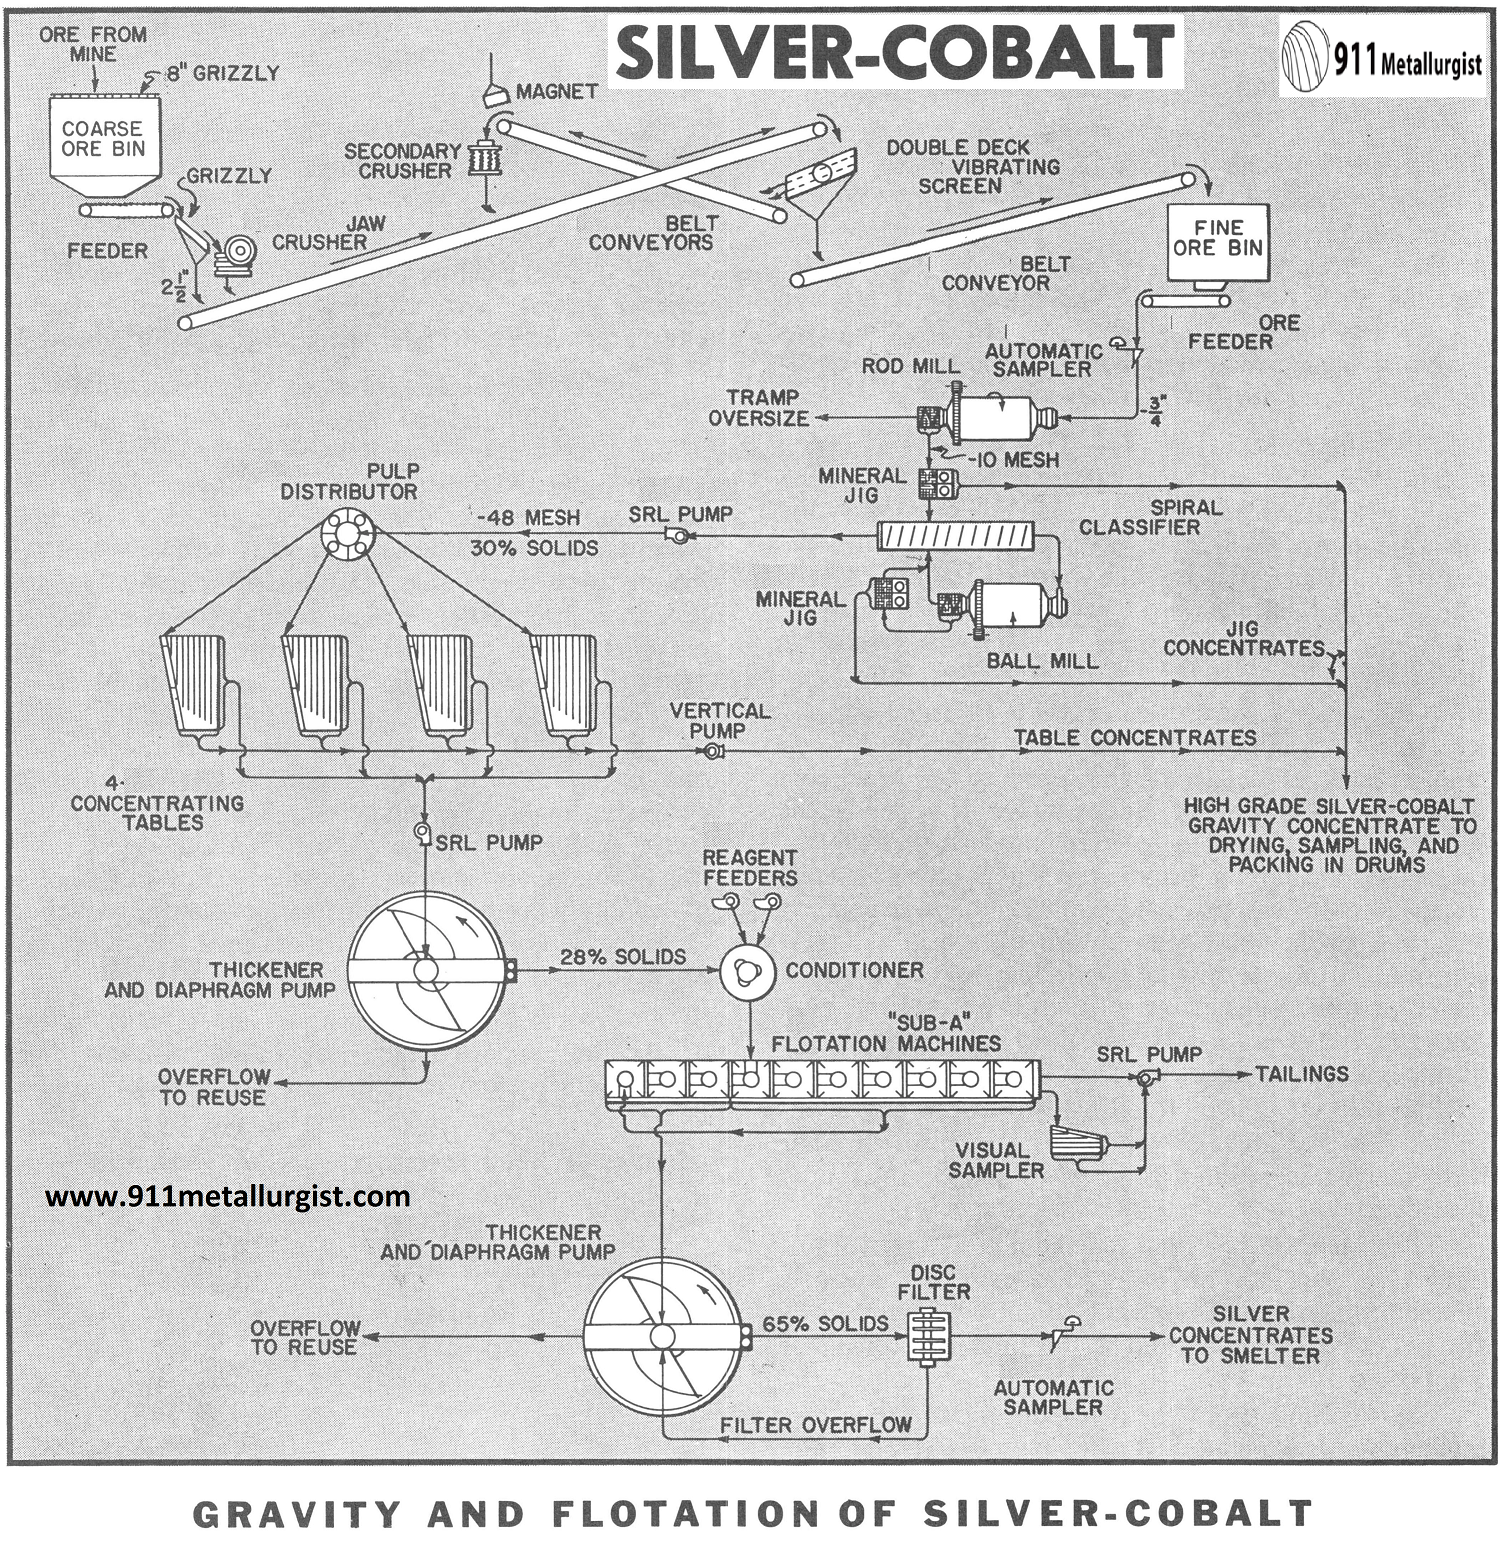 Gravity and Flotation of Silver-Cobalt